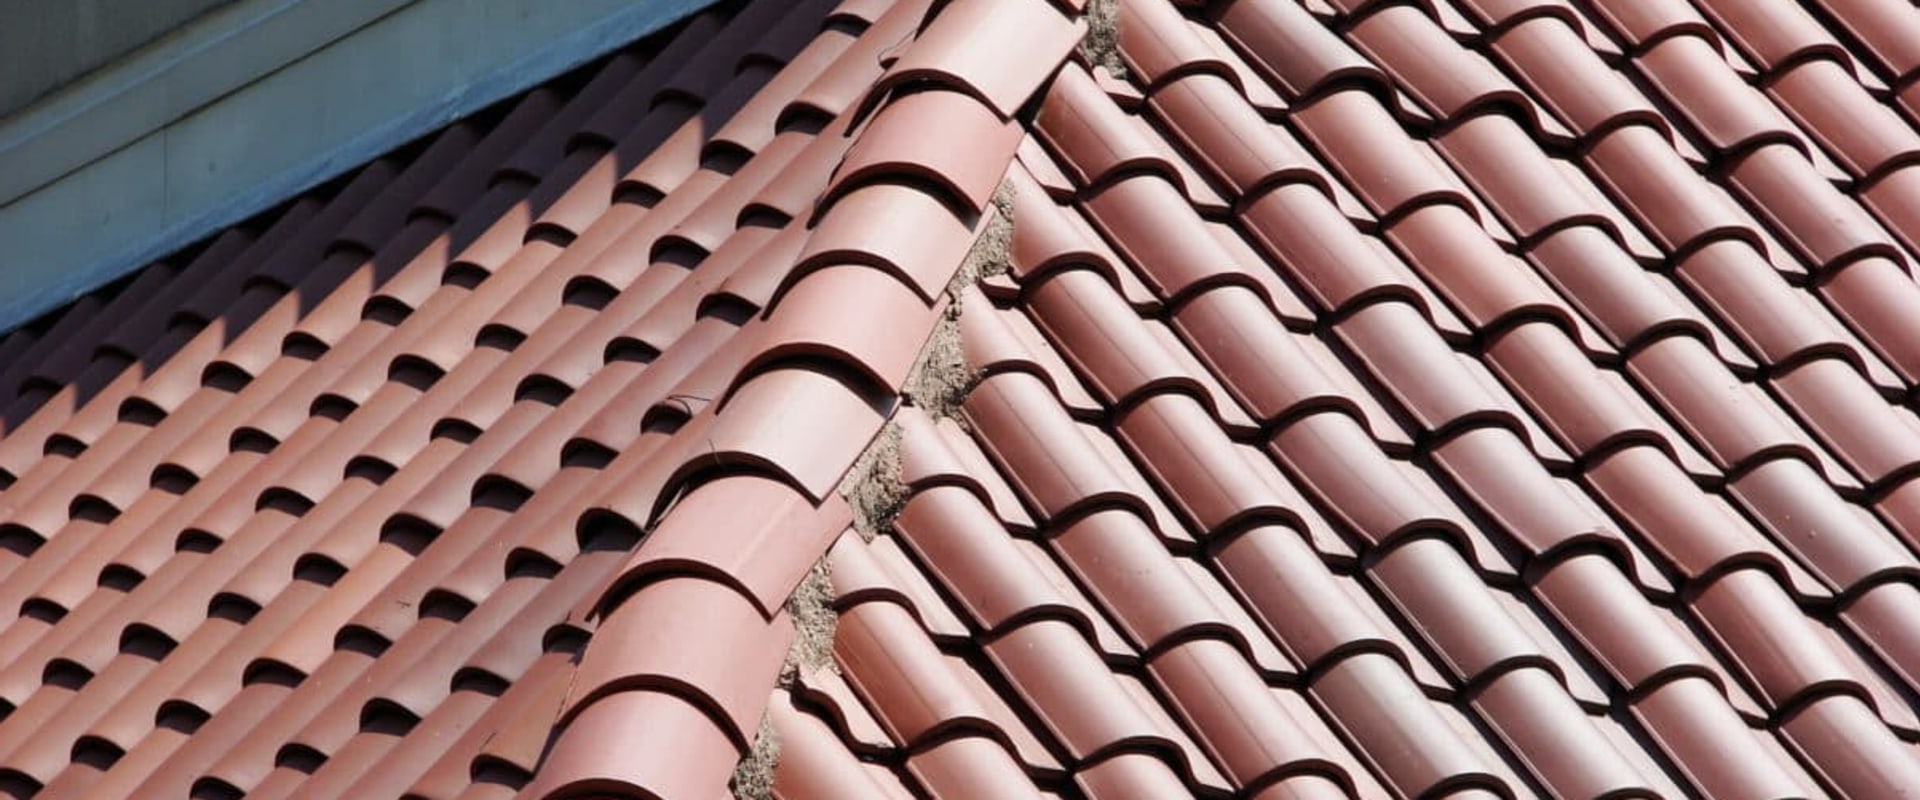 The Importance of Quality Materials and Workmanship for Top-Rated Roofing Companies